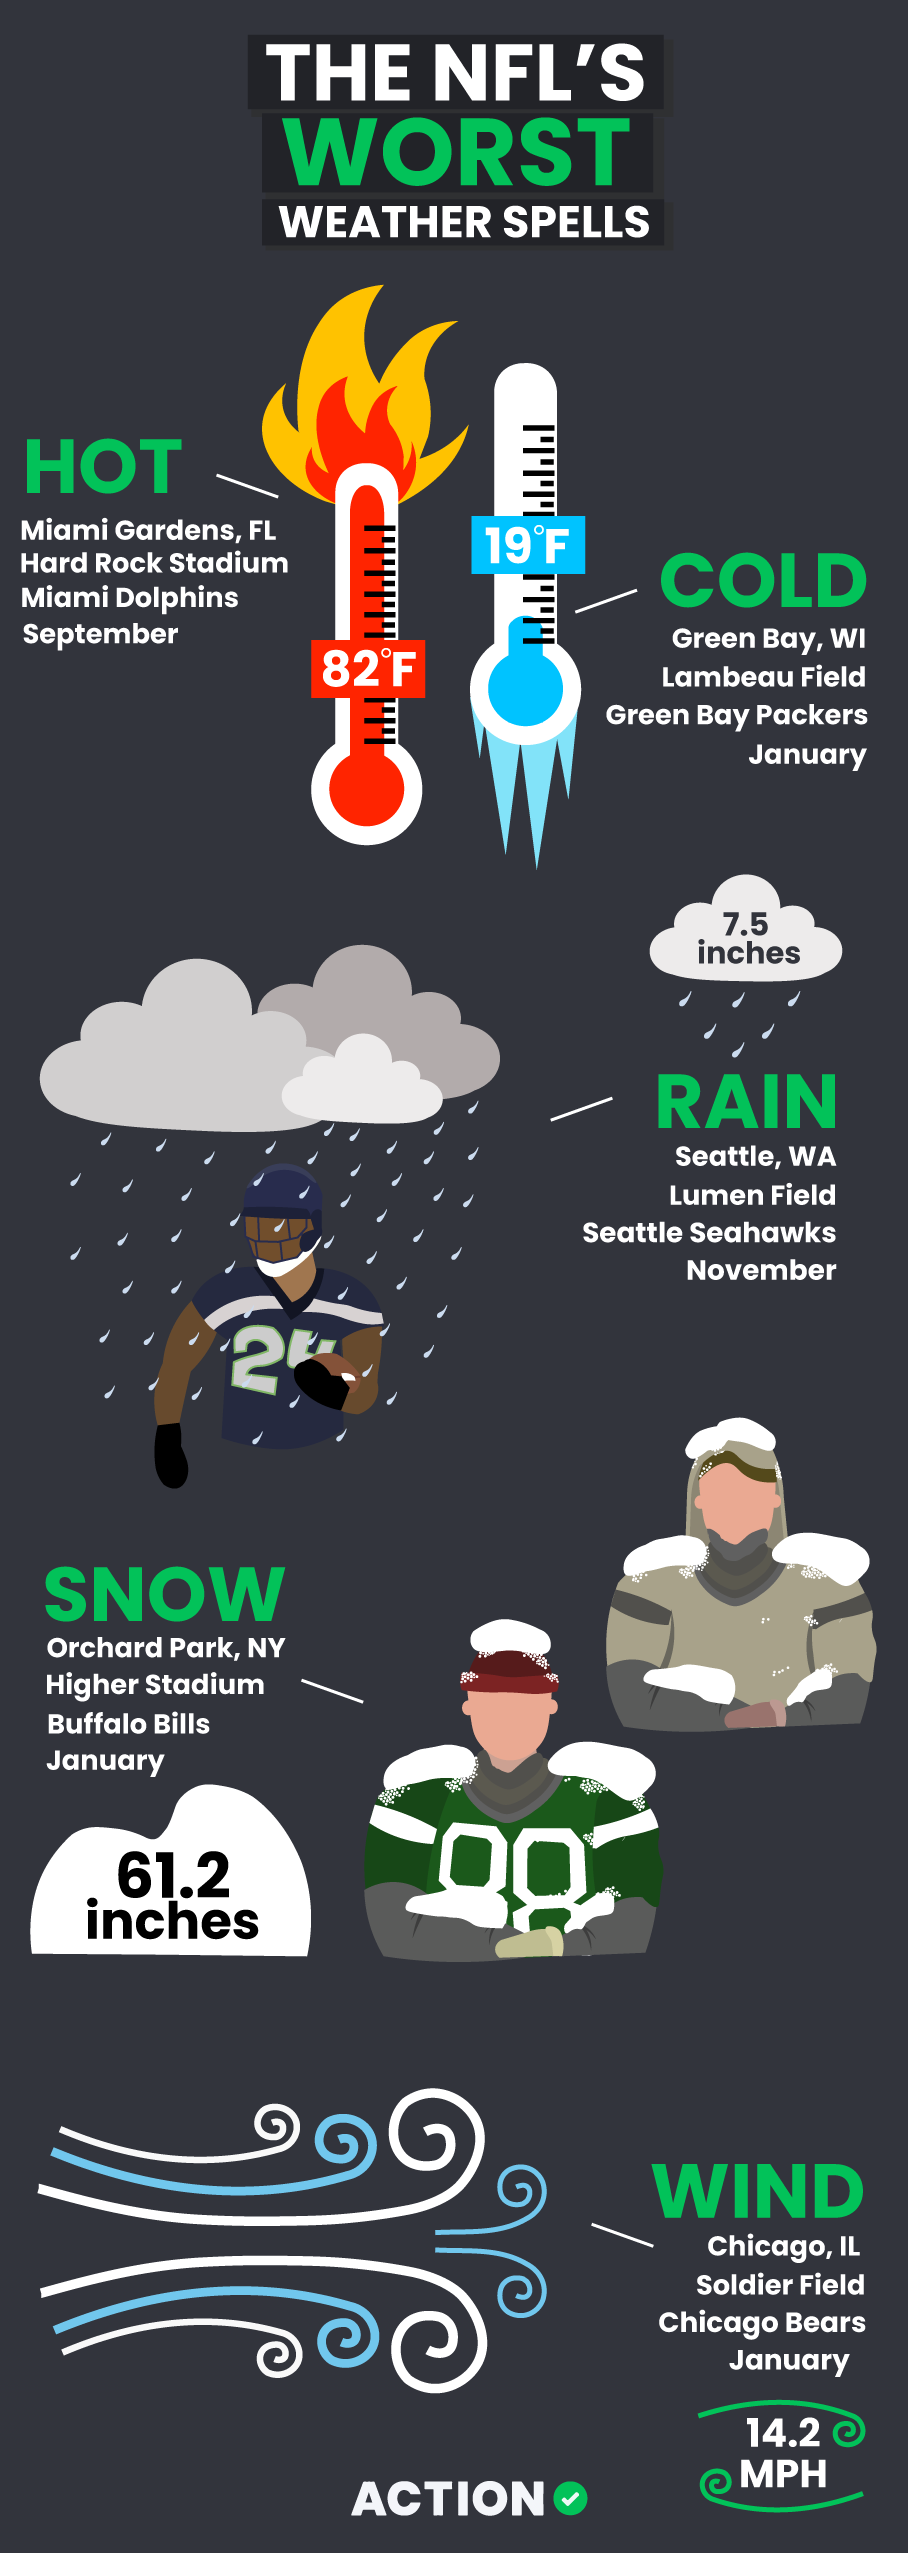 Worst Weather Conditions in the NFL